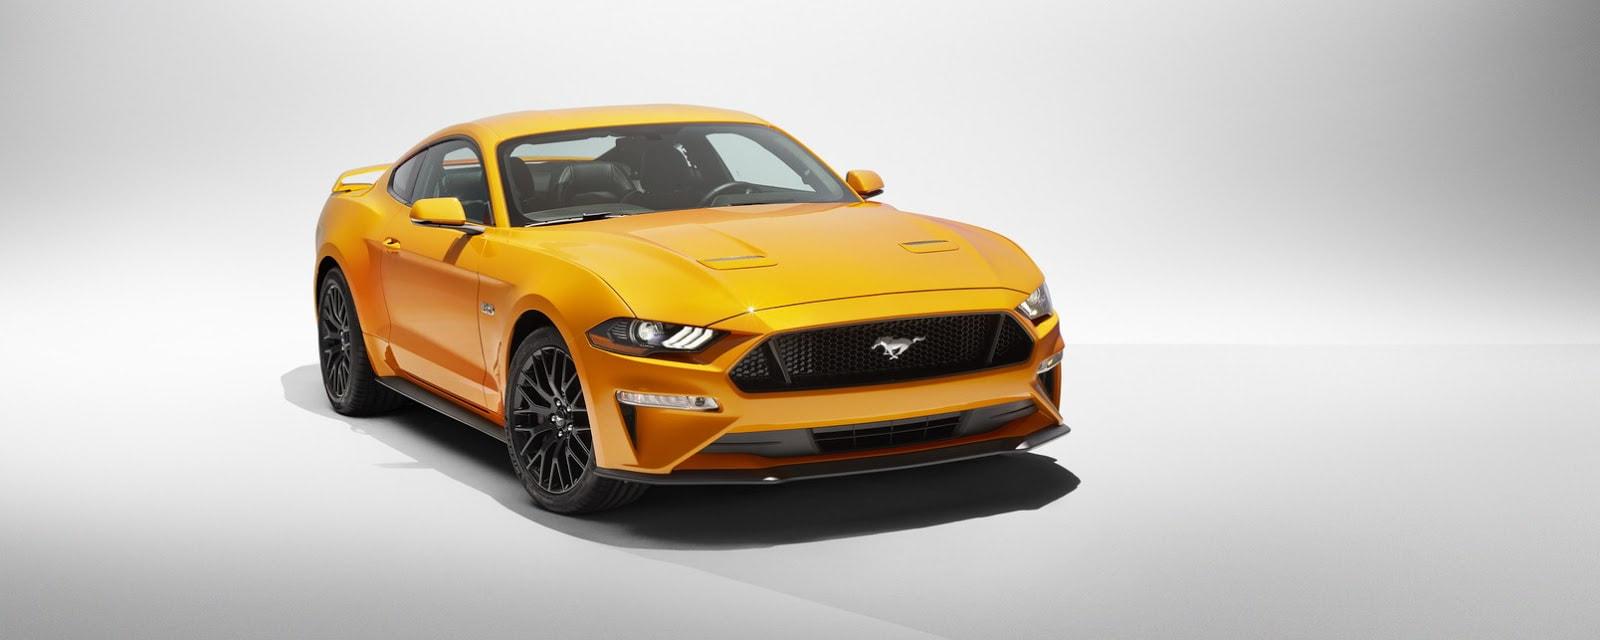 2018 Ford Mustang front